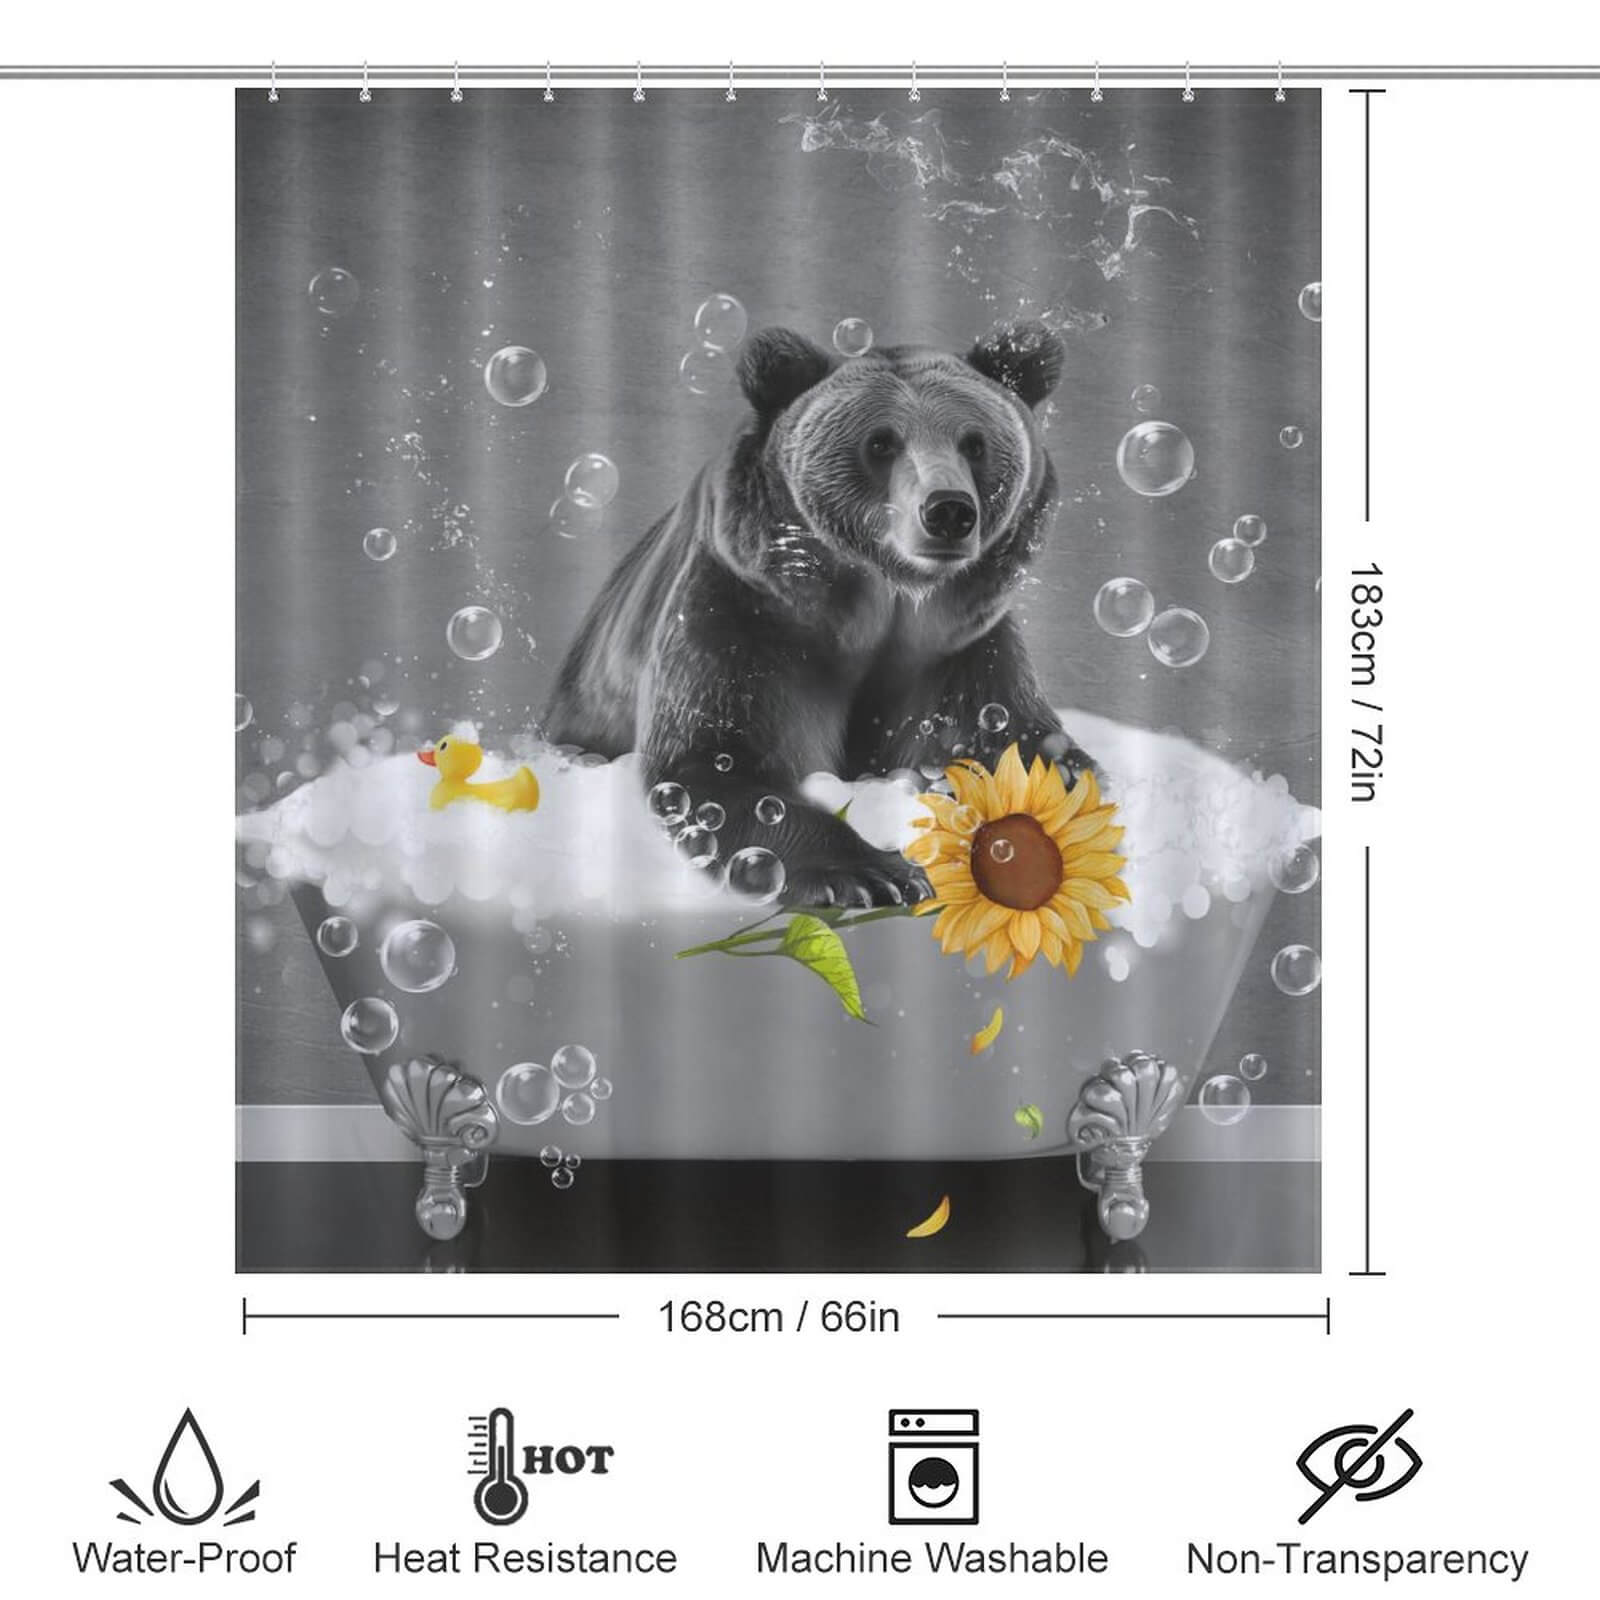 A Funny Sunflower Bear Shower Curtain by Cotton Cat, perfect for bathroom décor with bubbles and sunflowers.